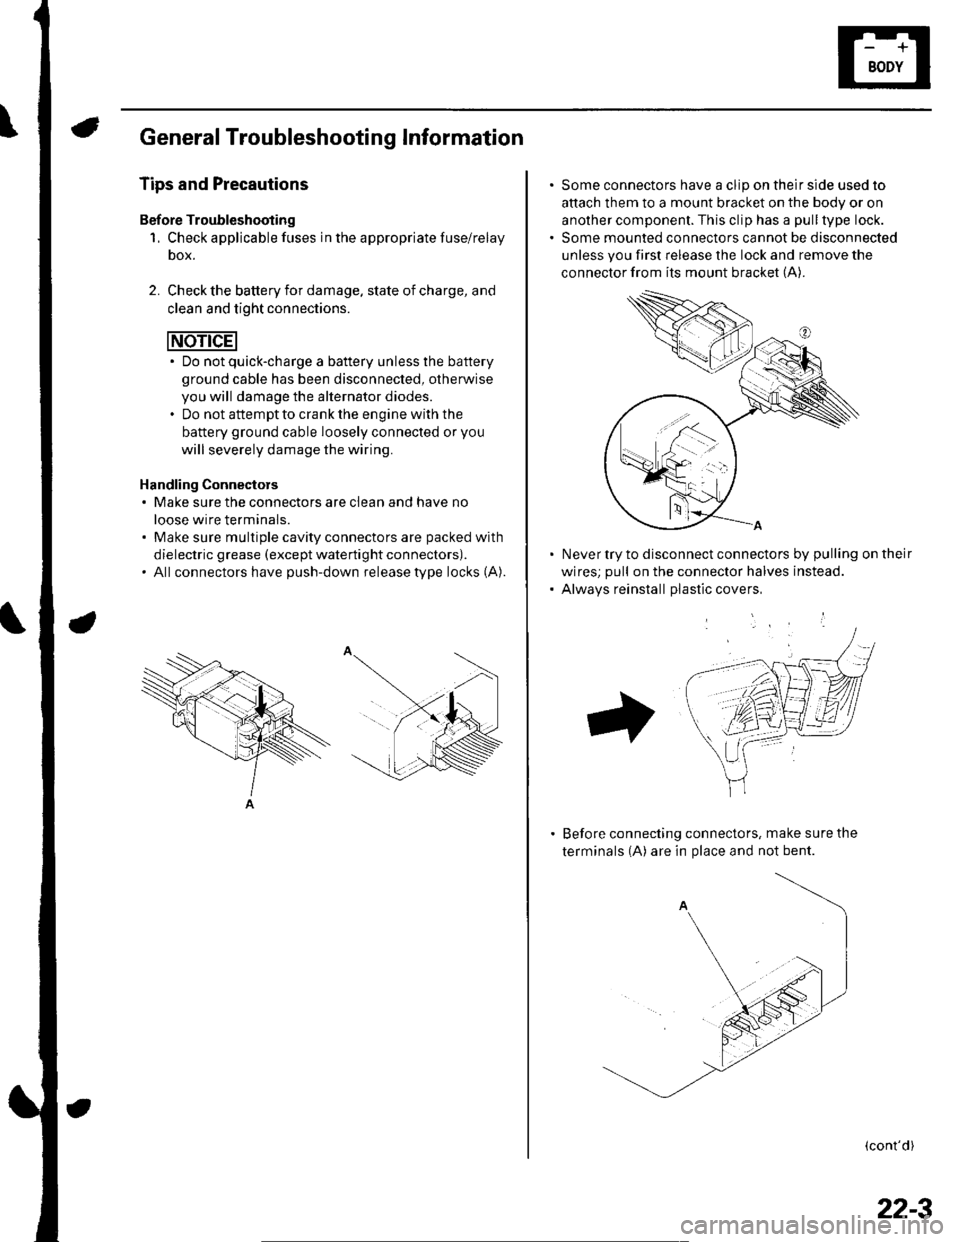 HONDA CIVIC 2003 7.G Workshop Manual General Troubleshooting Information
Tips and Precautions
Bef ore Troubleshooting
1. Check applicable fuses in the appropriate fuse/relay
oox.
2. Check the battery for damage. state of charge, and
clea